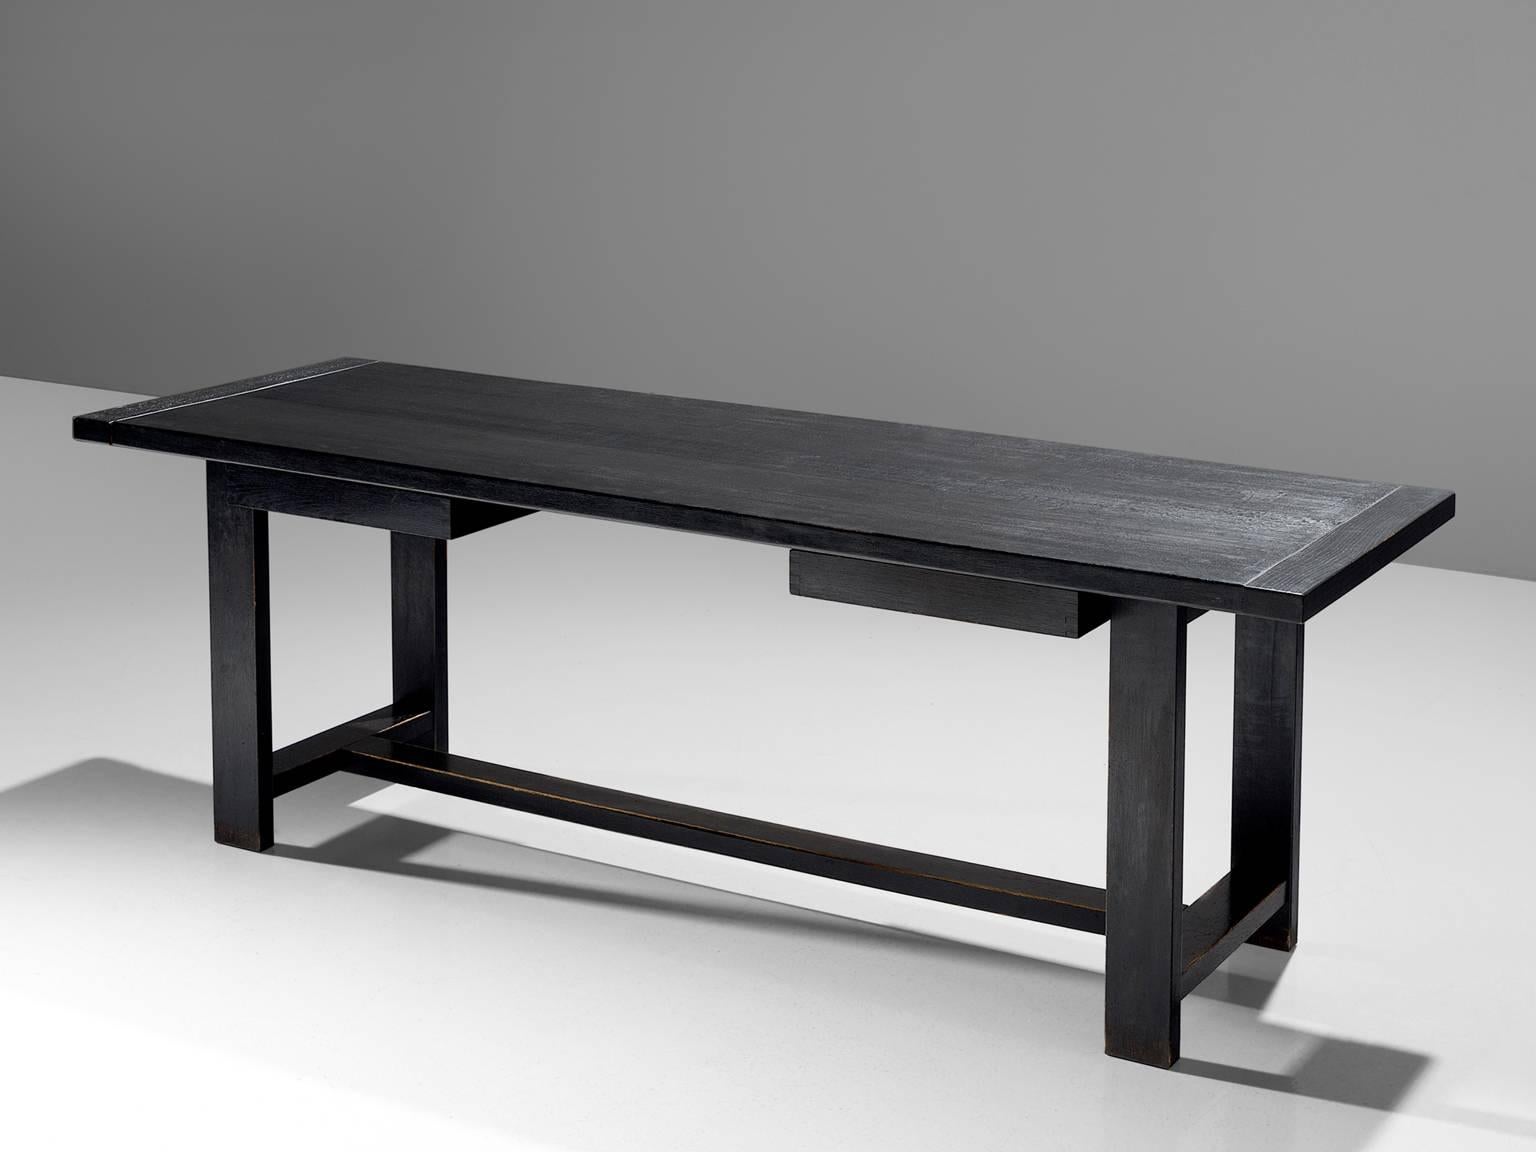 De Coene, stained black console table, Belgium, 1960s.

This dining table is made by De Coene in Belgium. The rectangular top had beveled edges. The table is geometric and minimalist and can be used as a desk or console table. Under the tabletop are